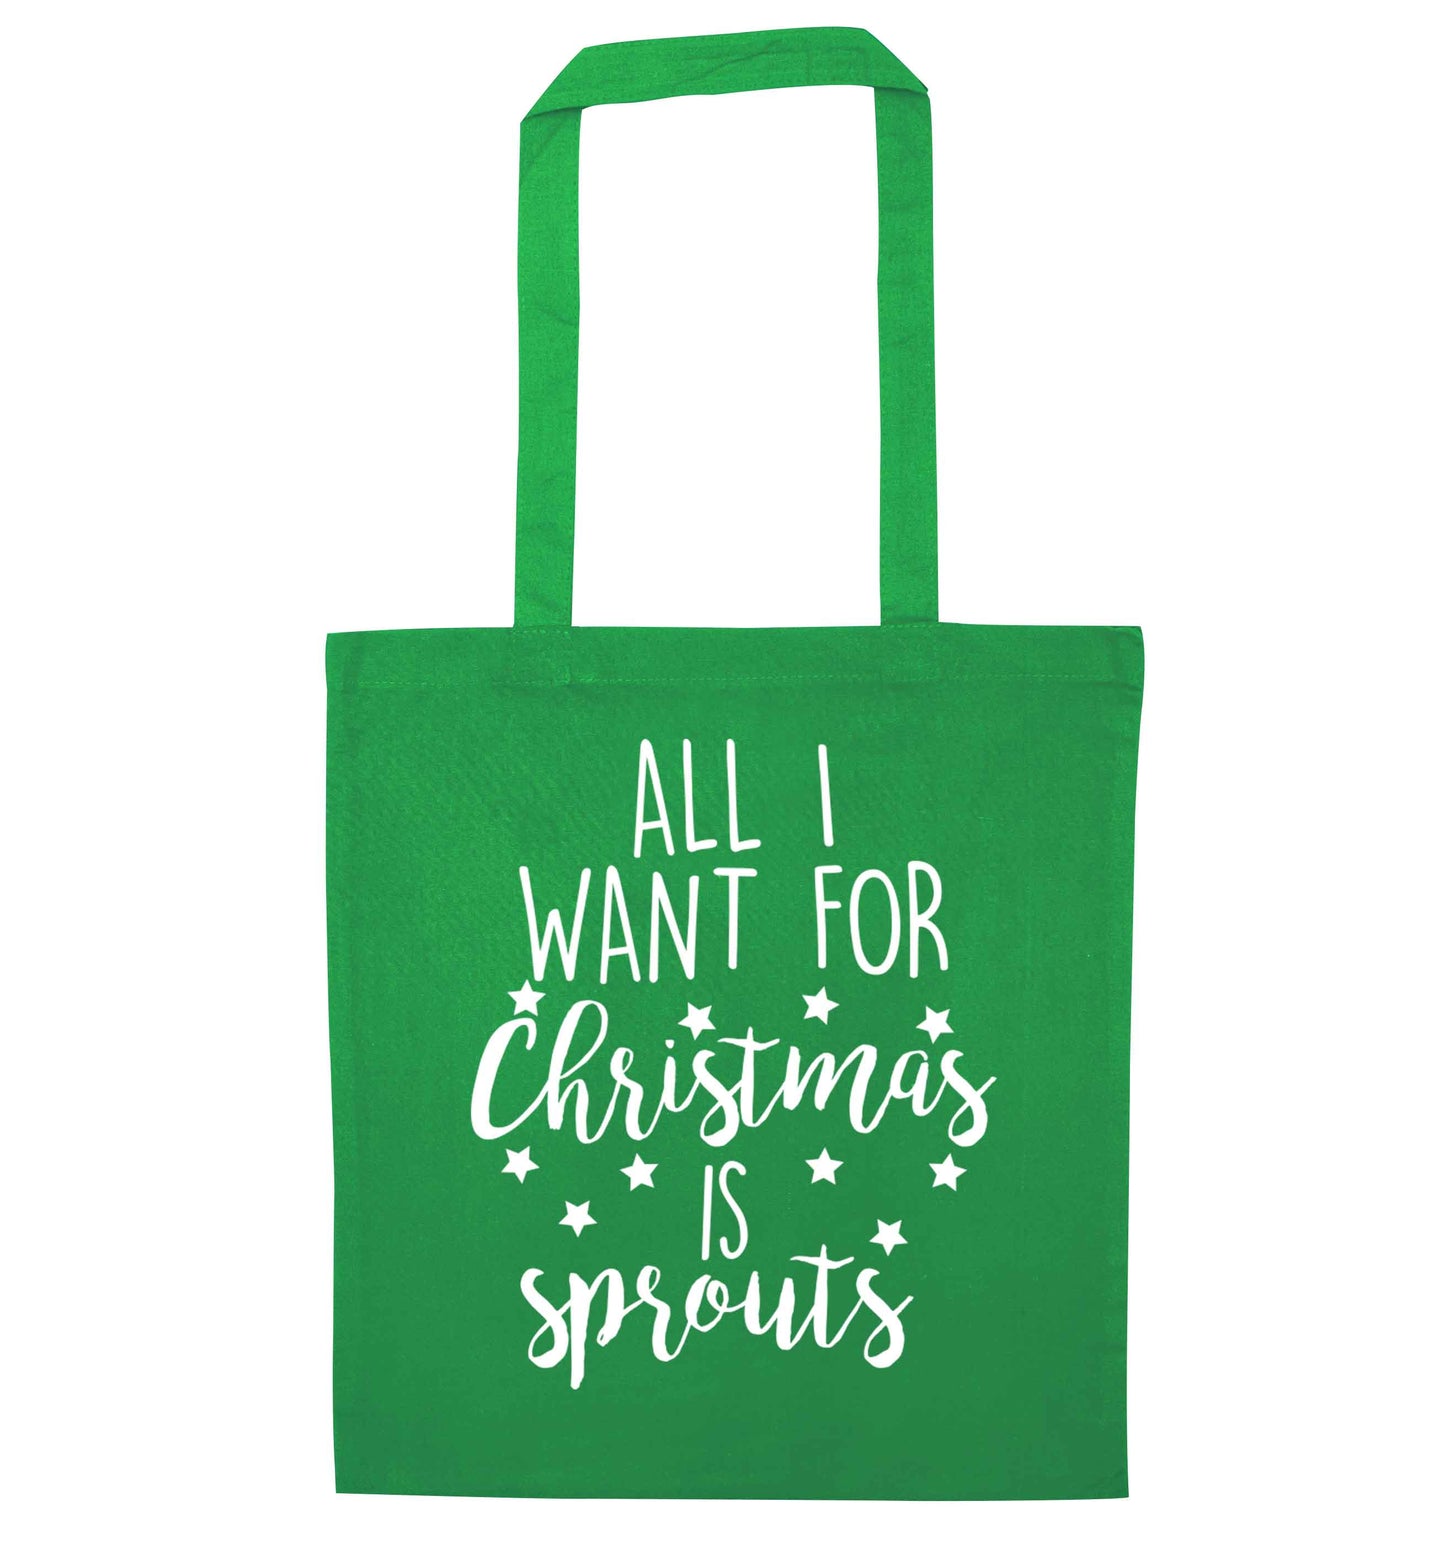 All I want for Christmas is sprouts green tote bag